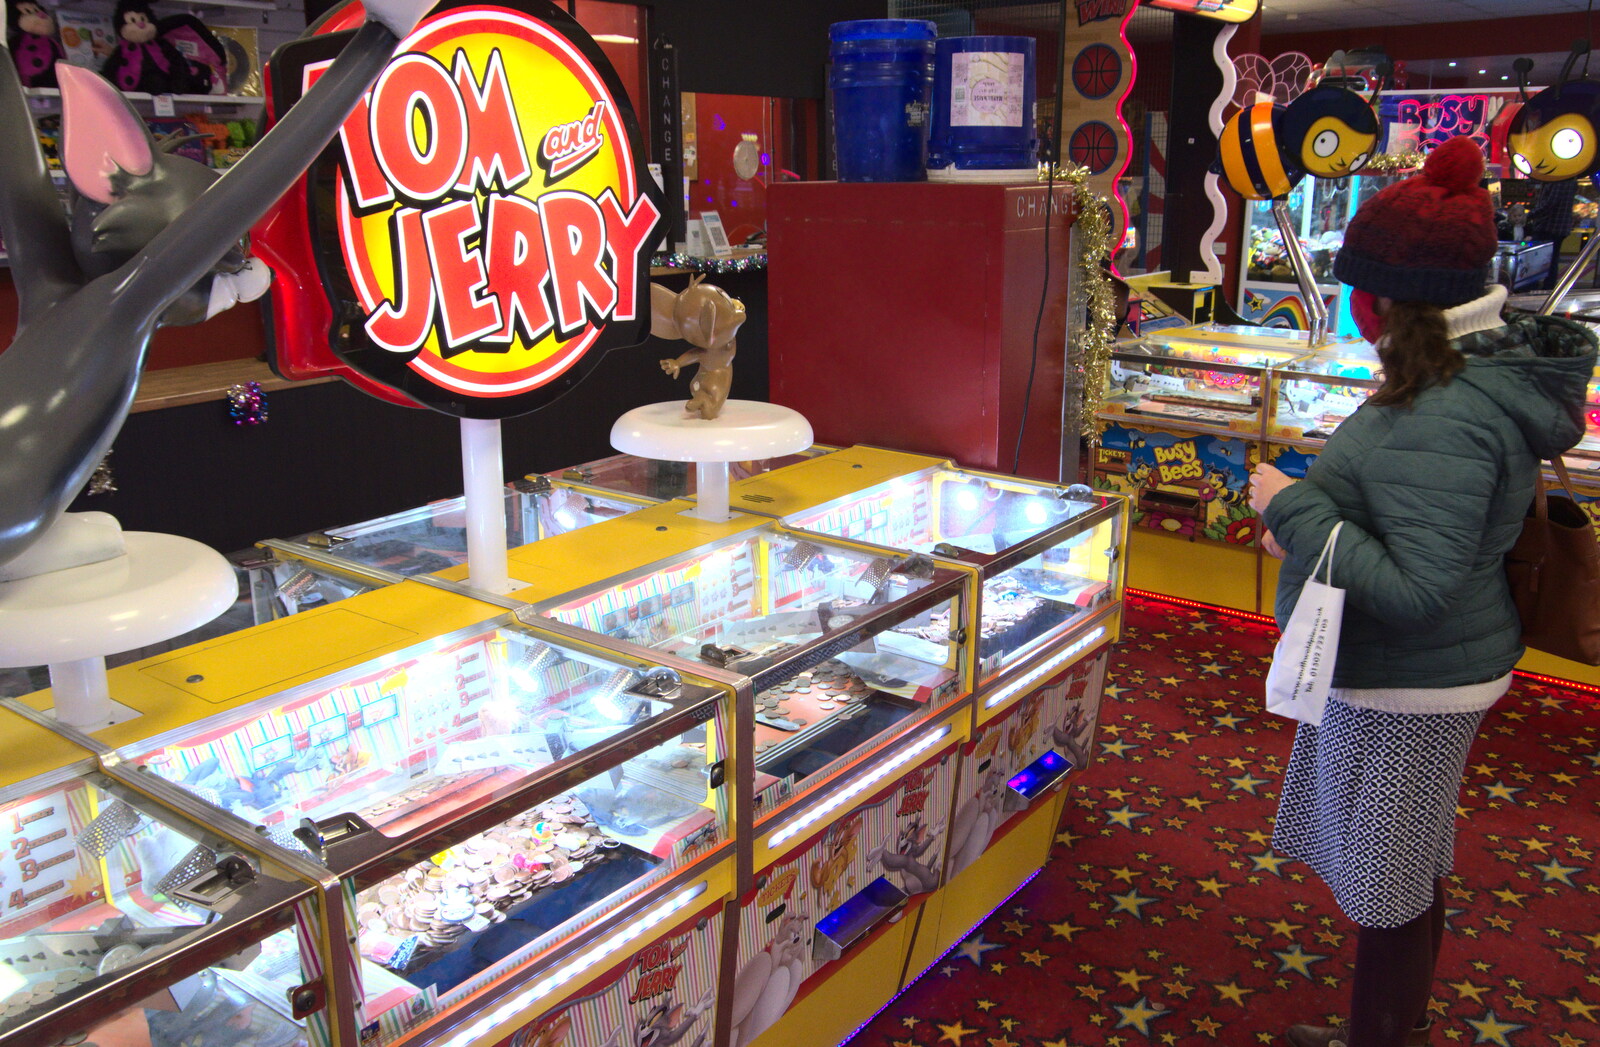 Isobel in the amusement arcade from A Return to the Beach, Southwold, Suffolk - 20th December 2020